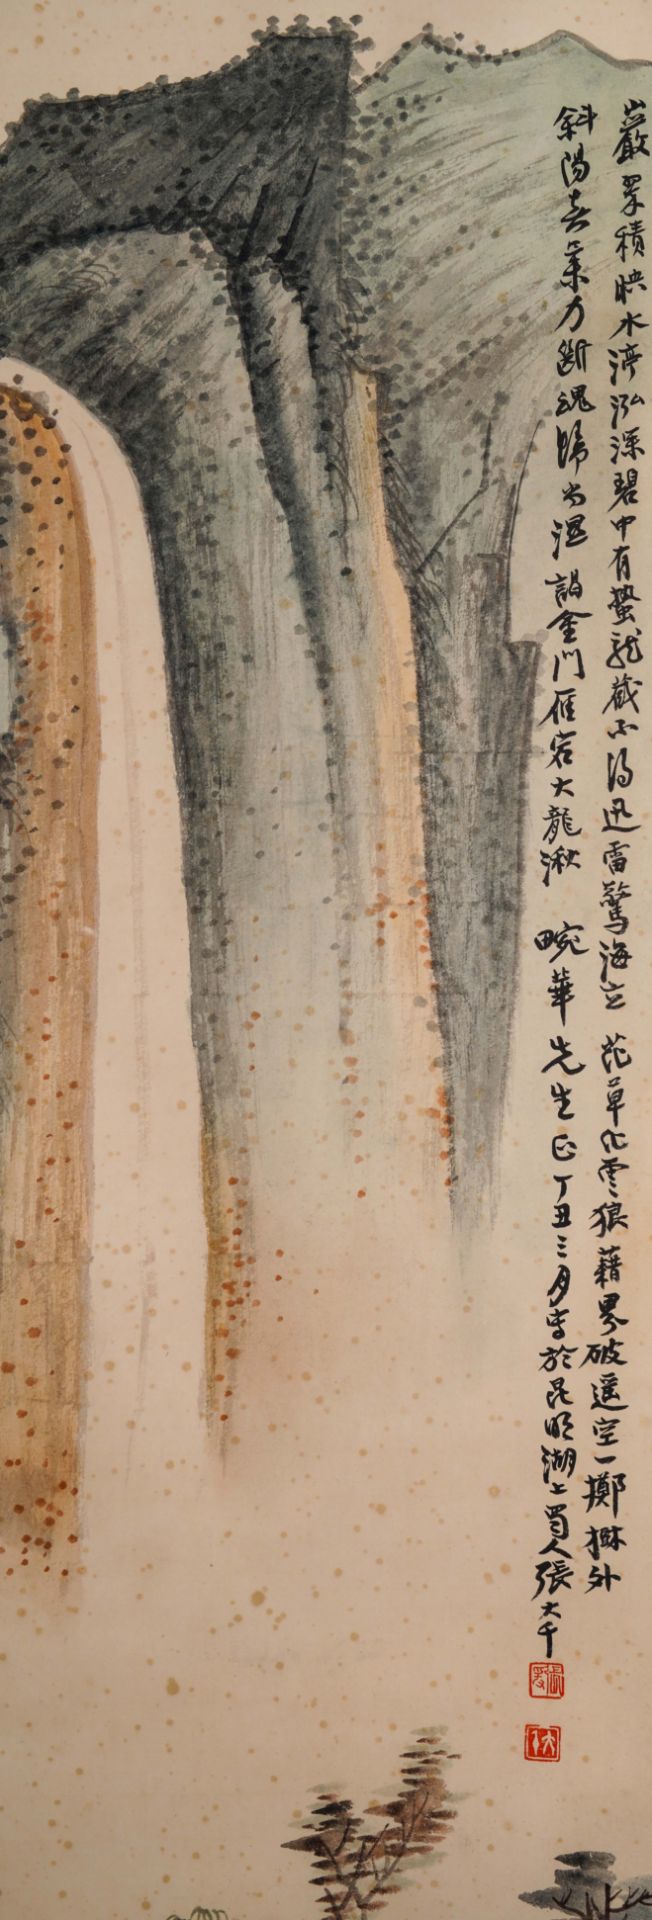 A Chinese Scroll Painting by Zhang Daqian - Image 3 of 8